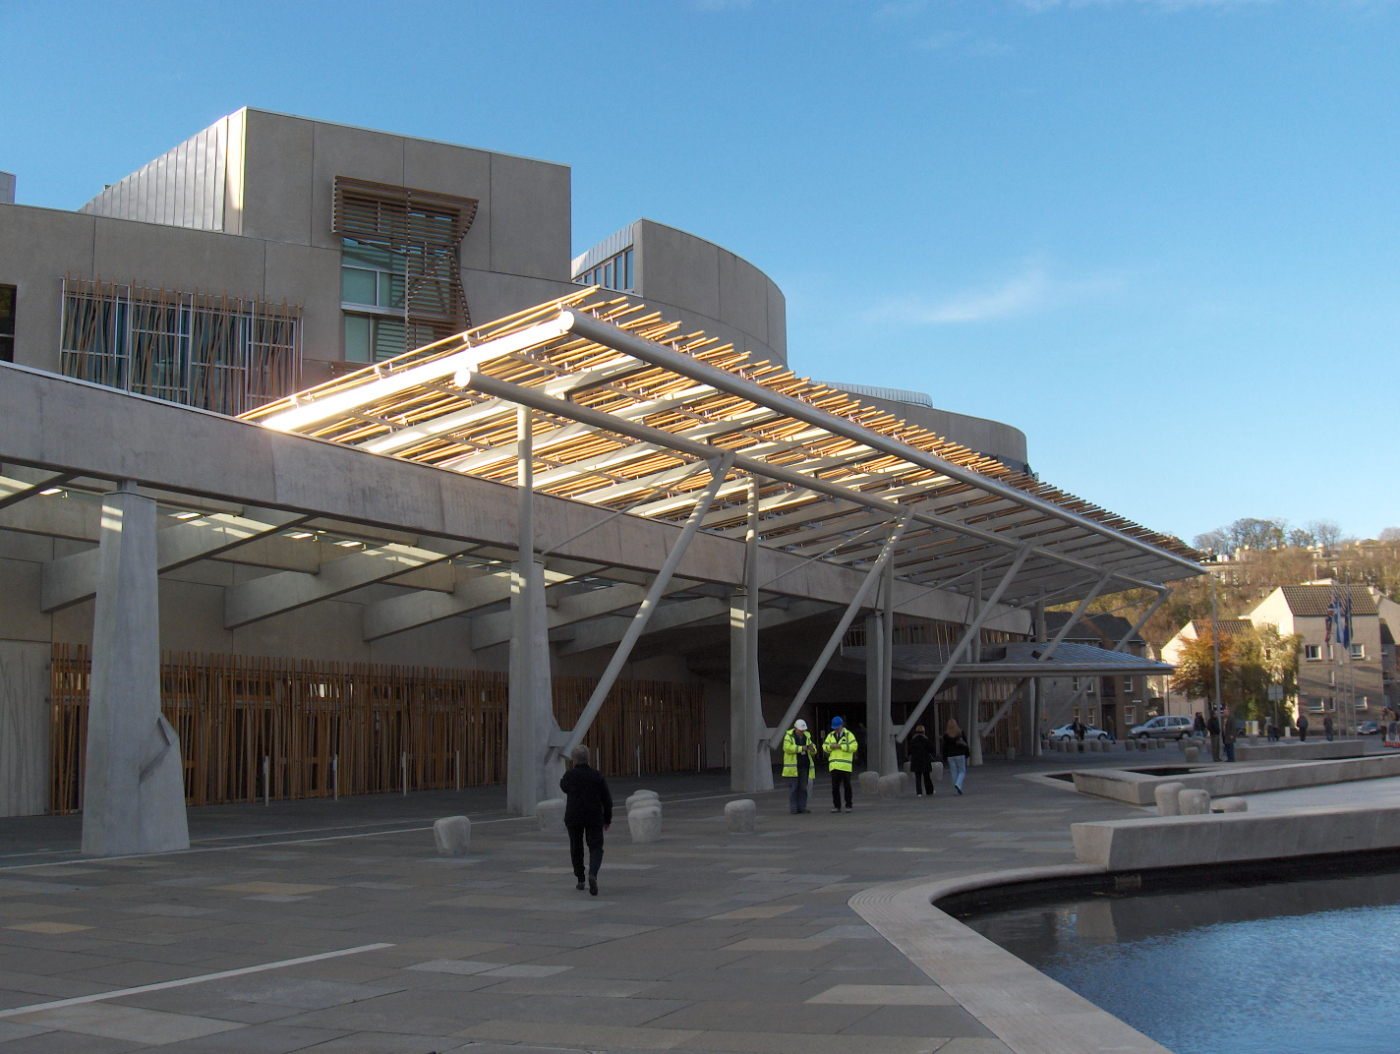 The Scottish Parliament - What Is The Most Visited Place In Edinburgh?